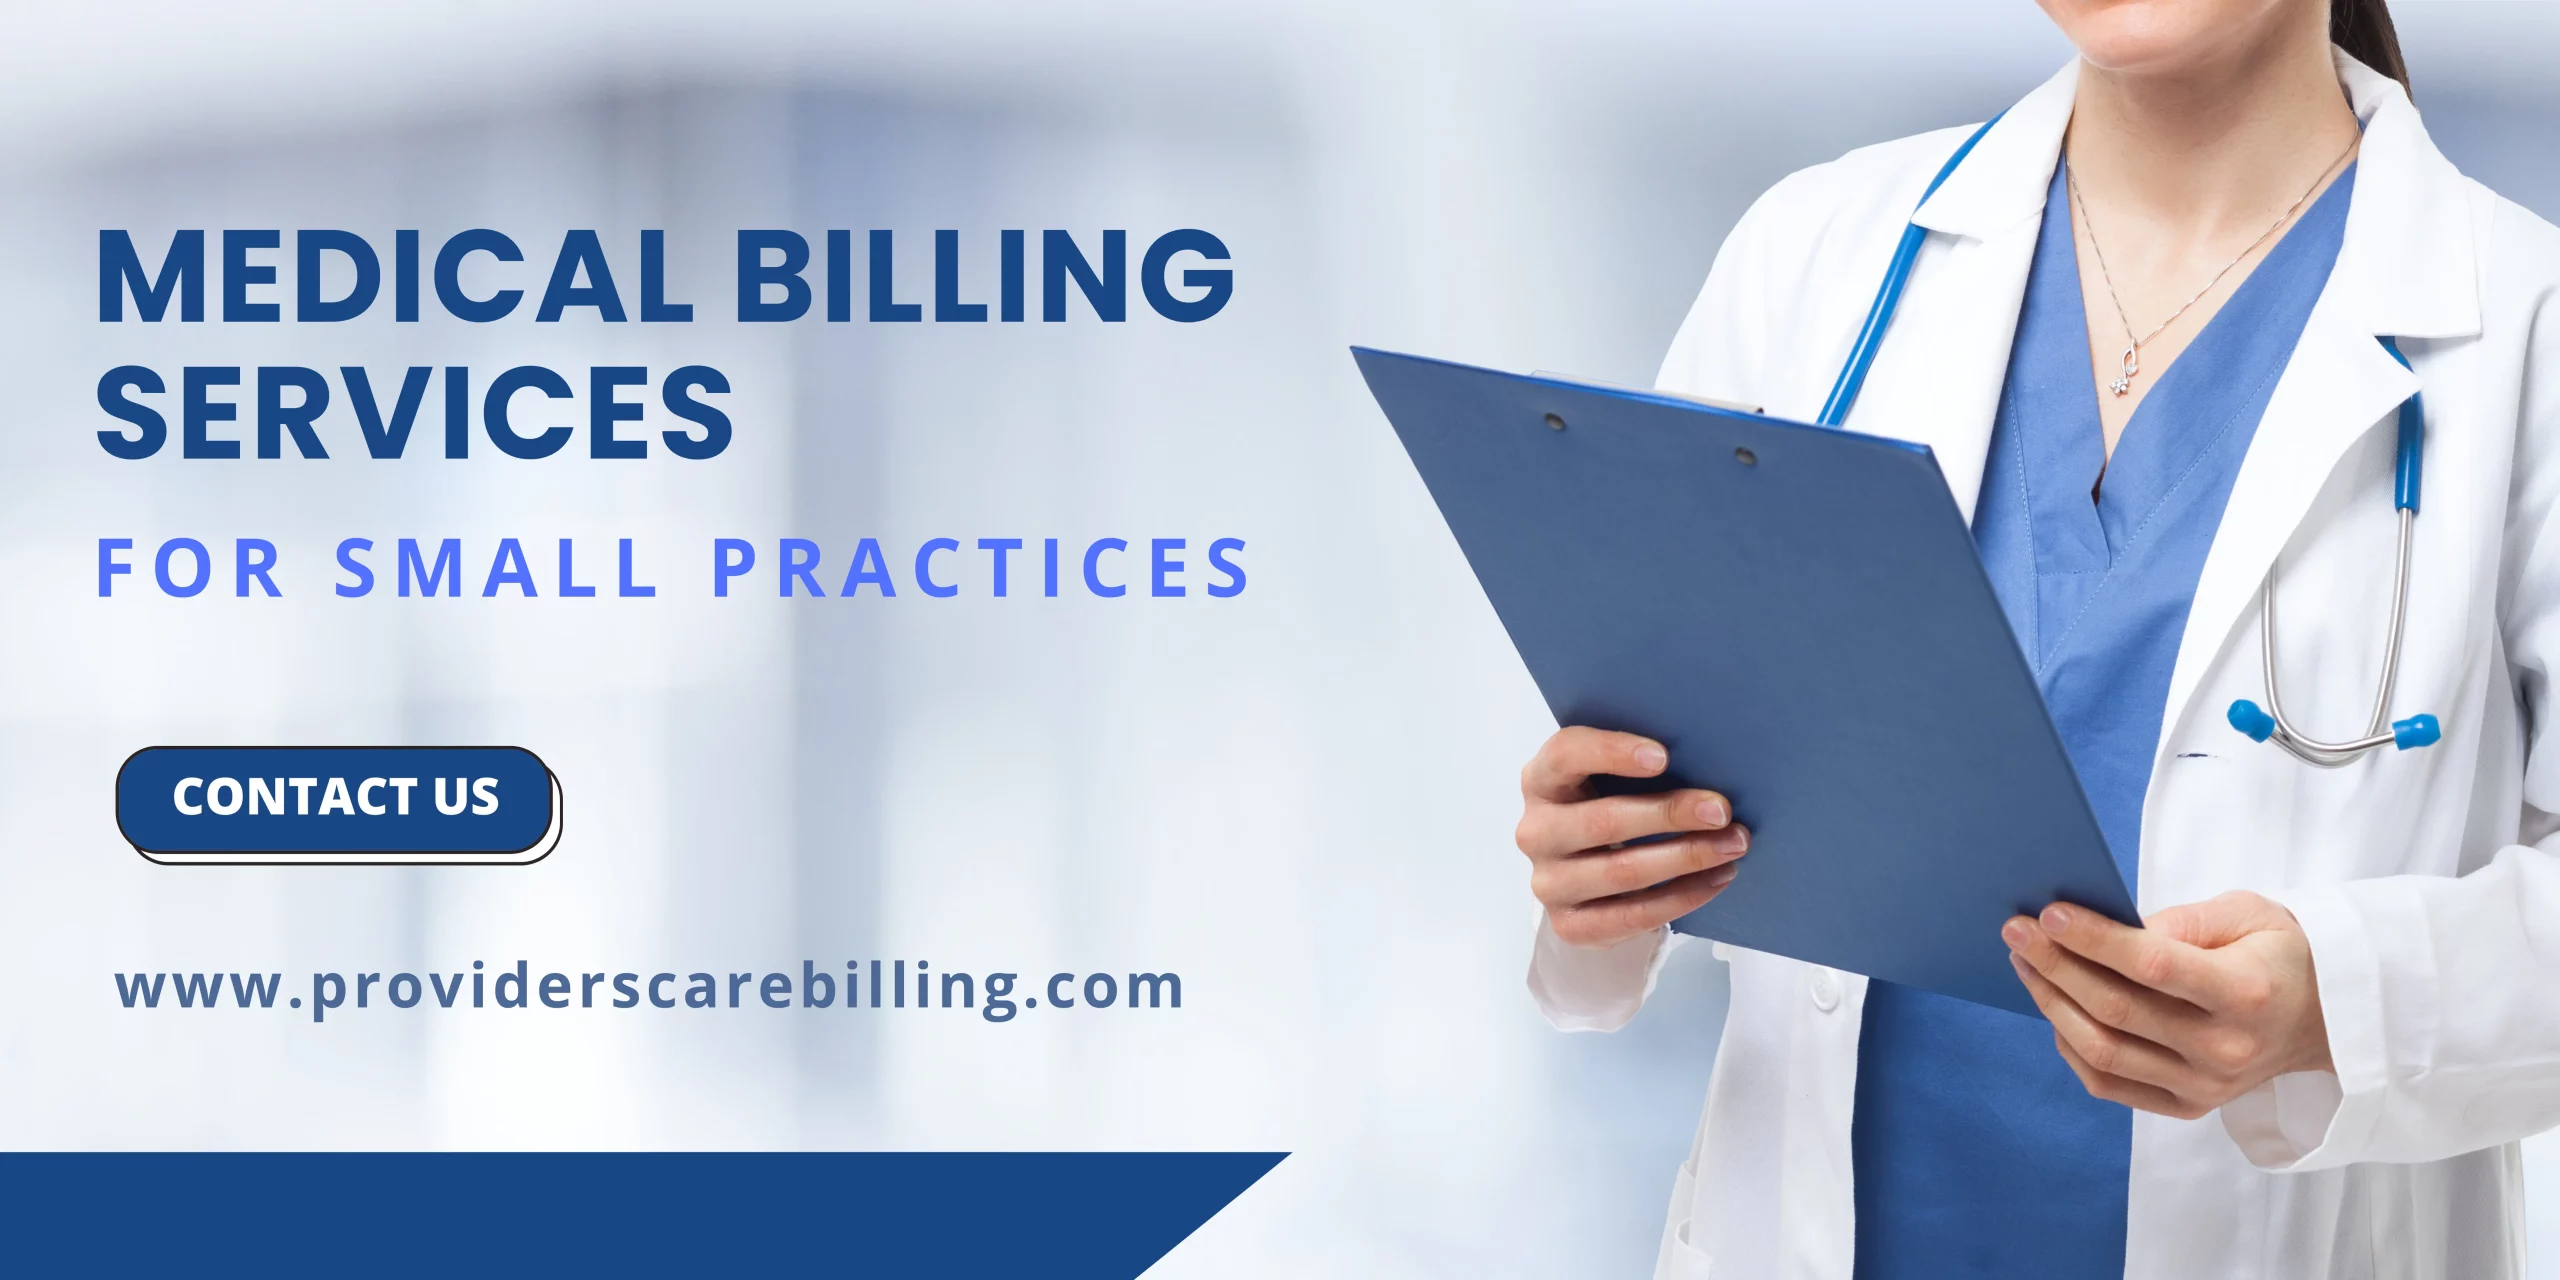 Medical Billing Services for Small Practices!